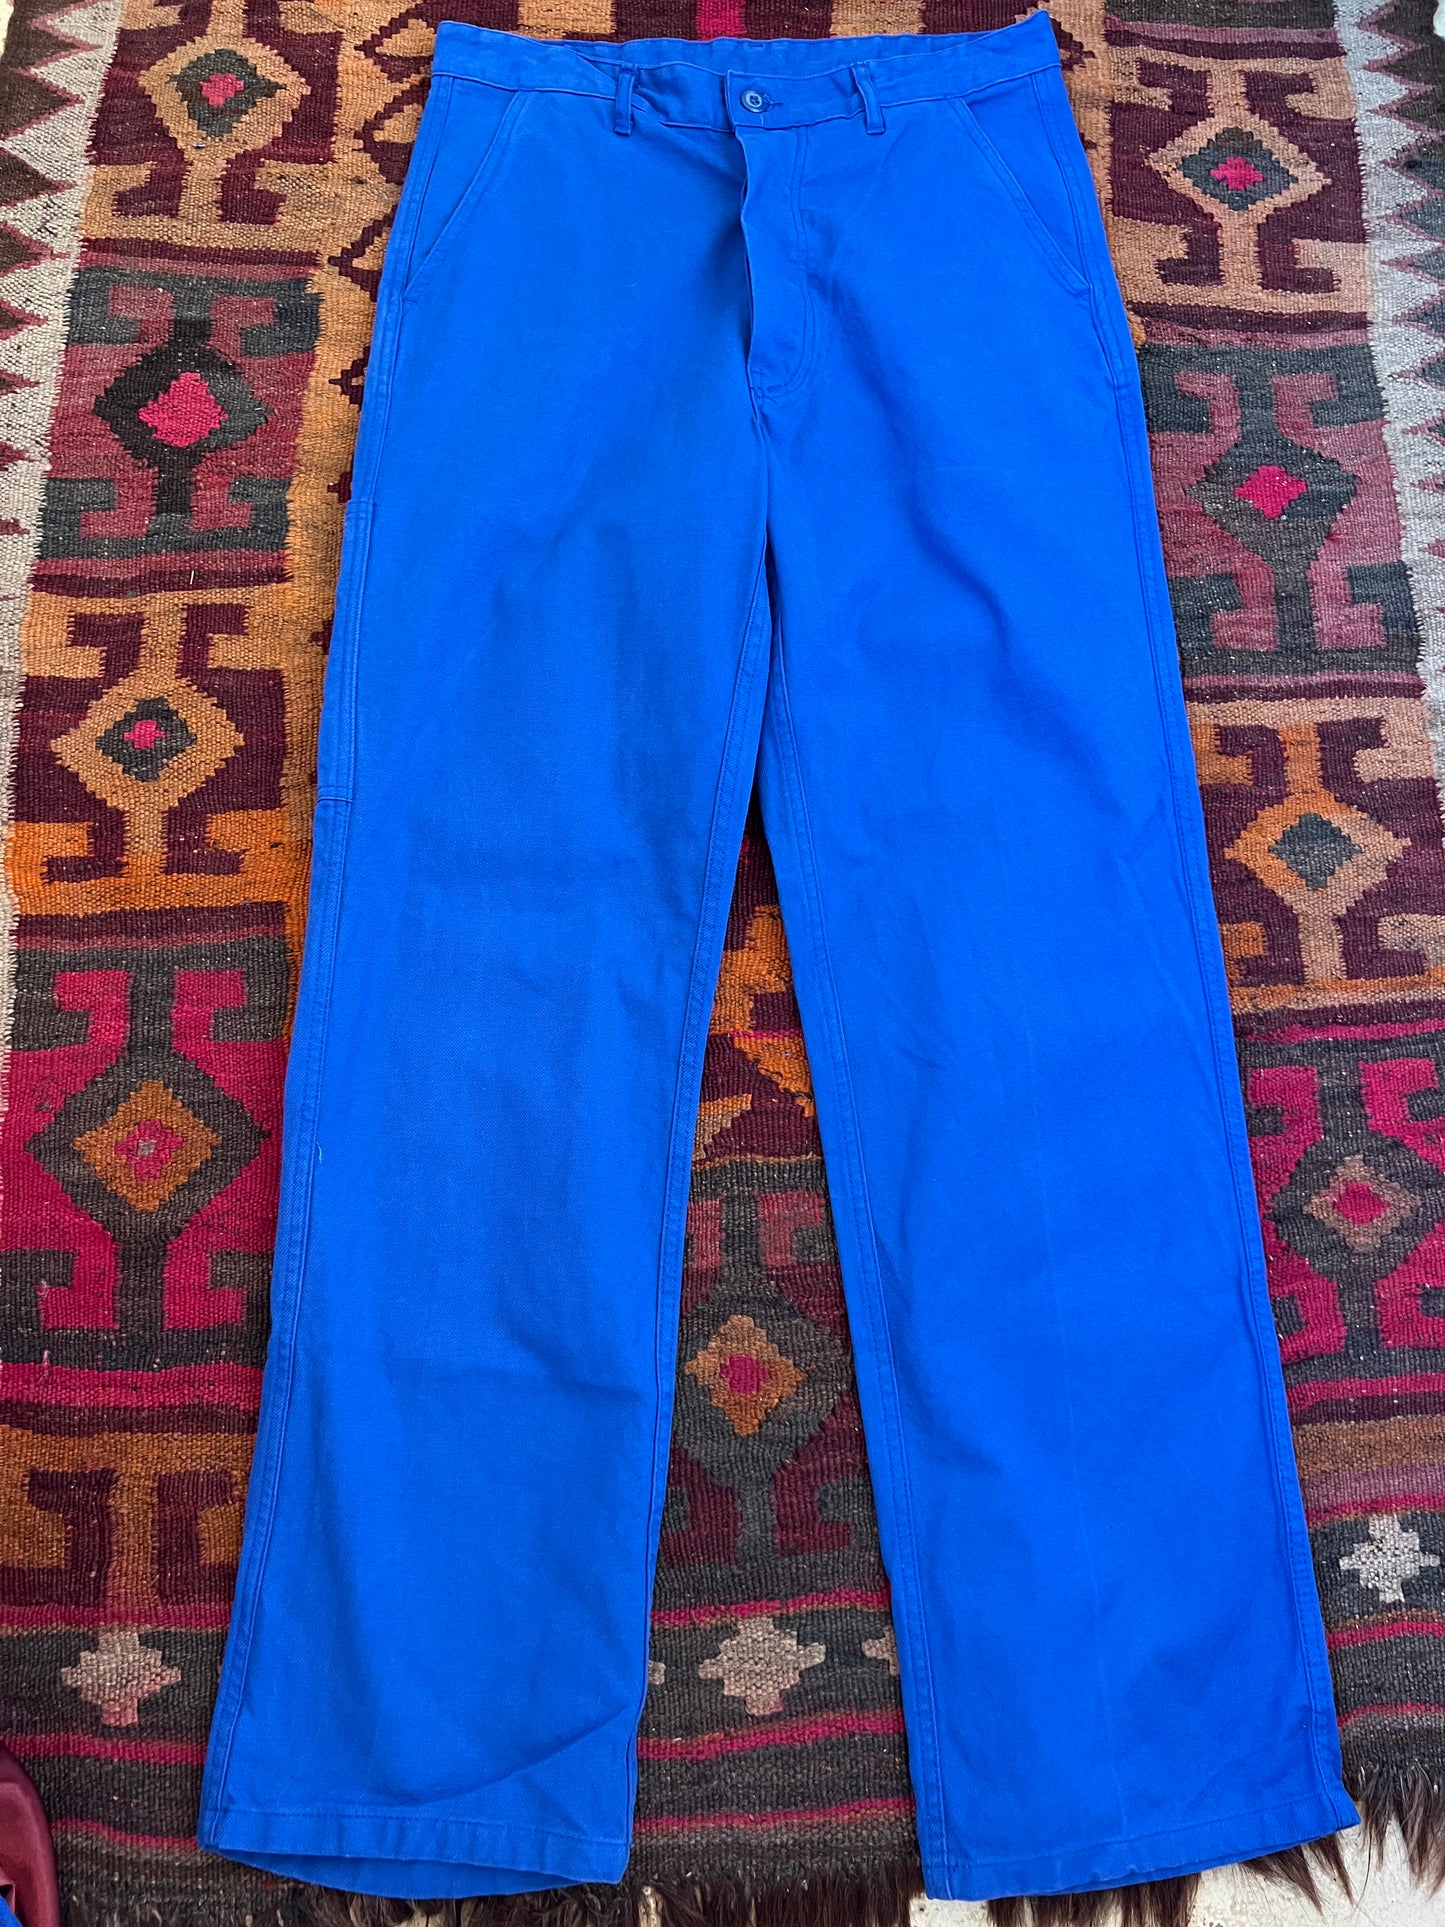 Vintage French Workwear Trousers